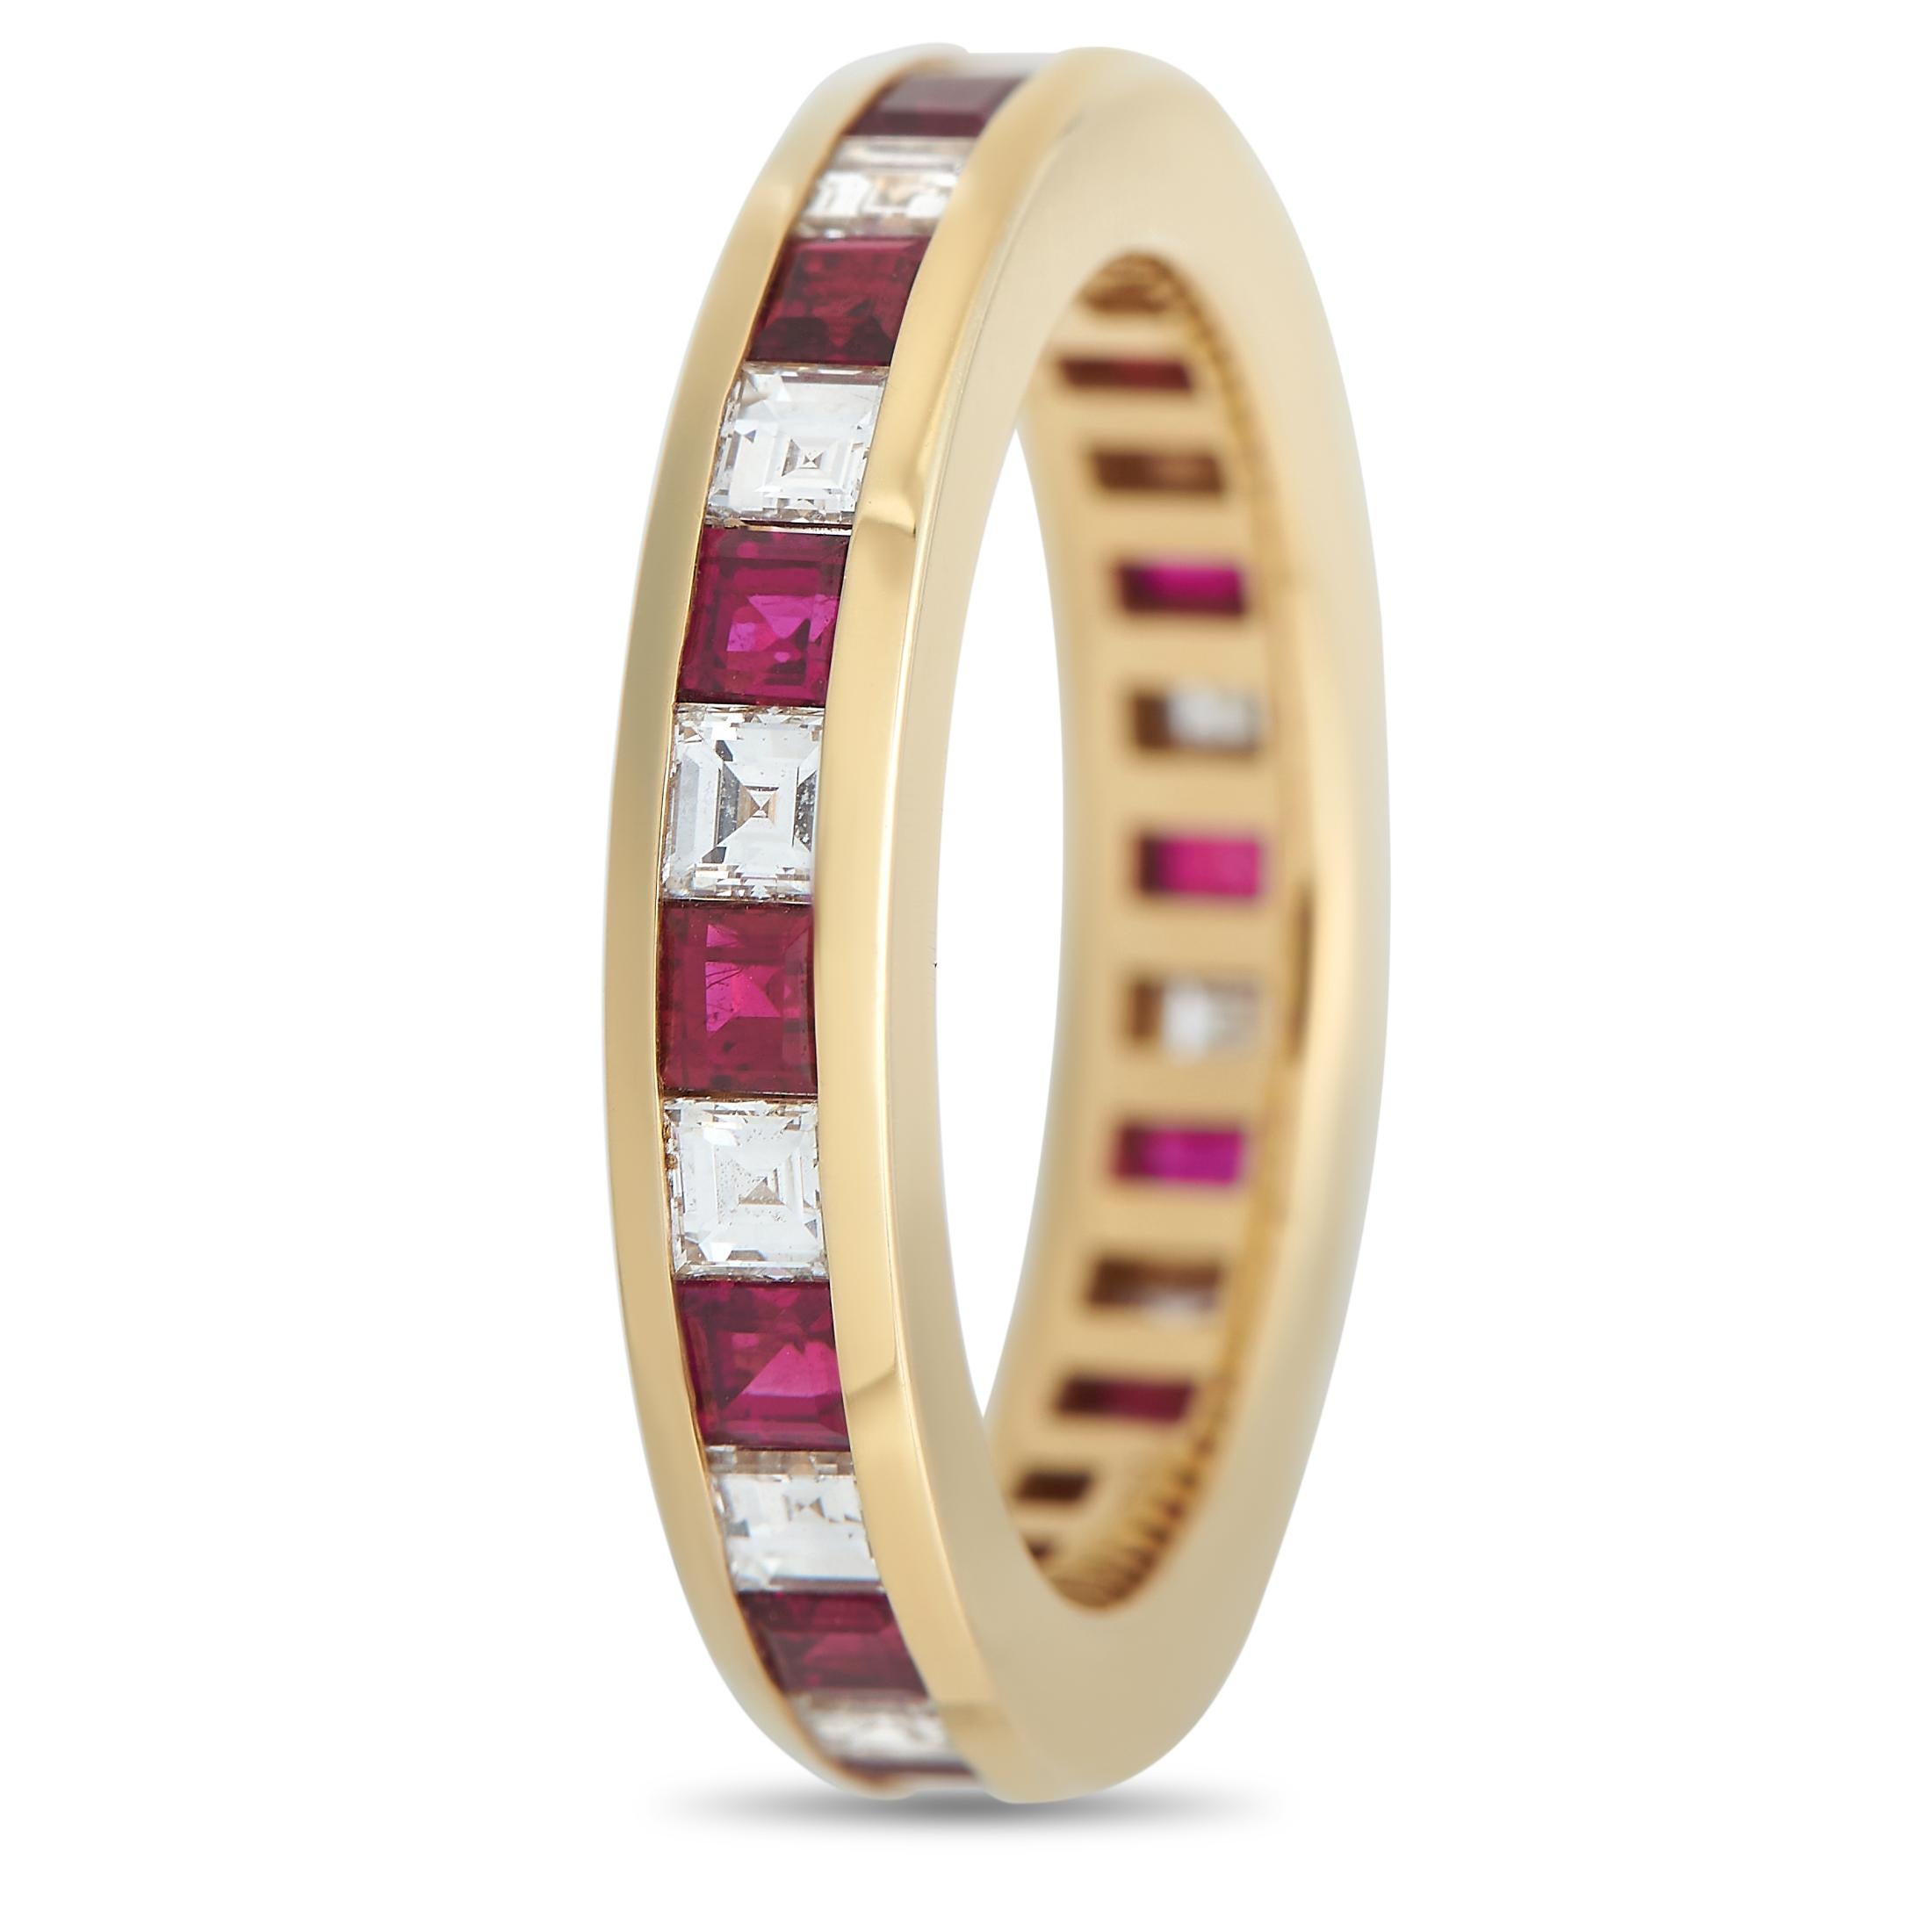 Let the never-ending sparkle of this eternity ring mark your never-ending love. This stunning Tiffany & Co. ring is crafted in 18K yellow gold and features an alternating pattern of channel-set square-cut rubies and diamonds.Offered in estate